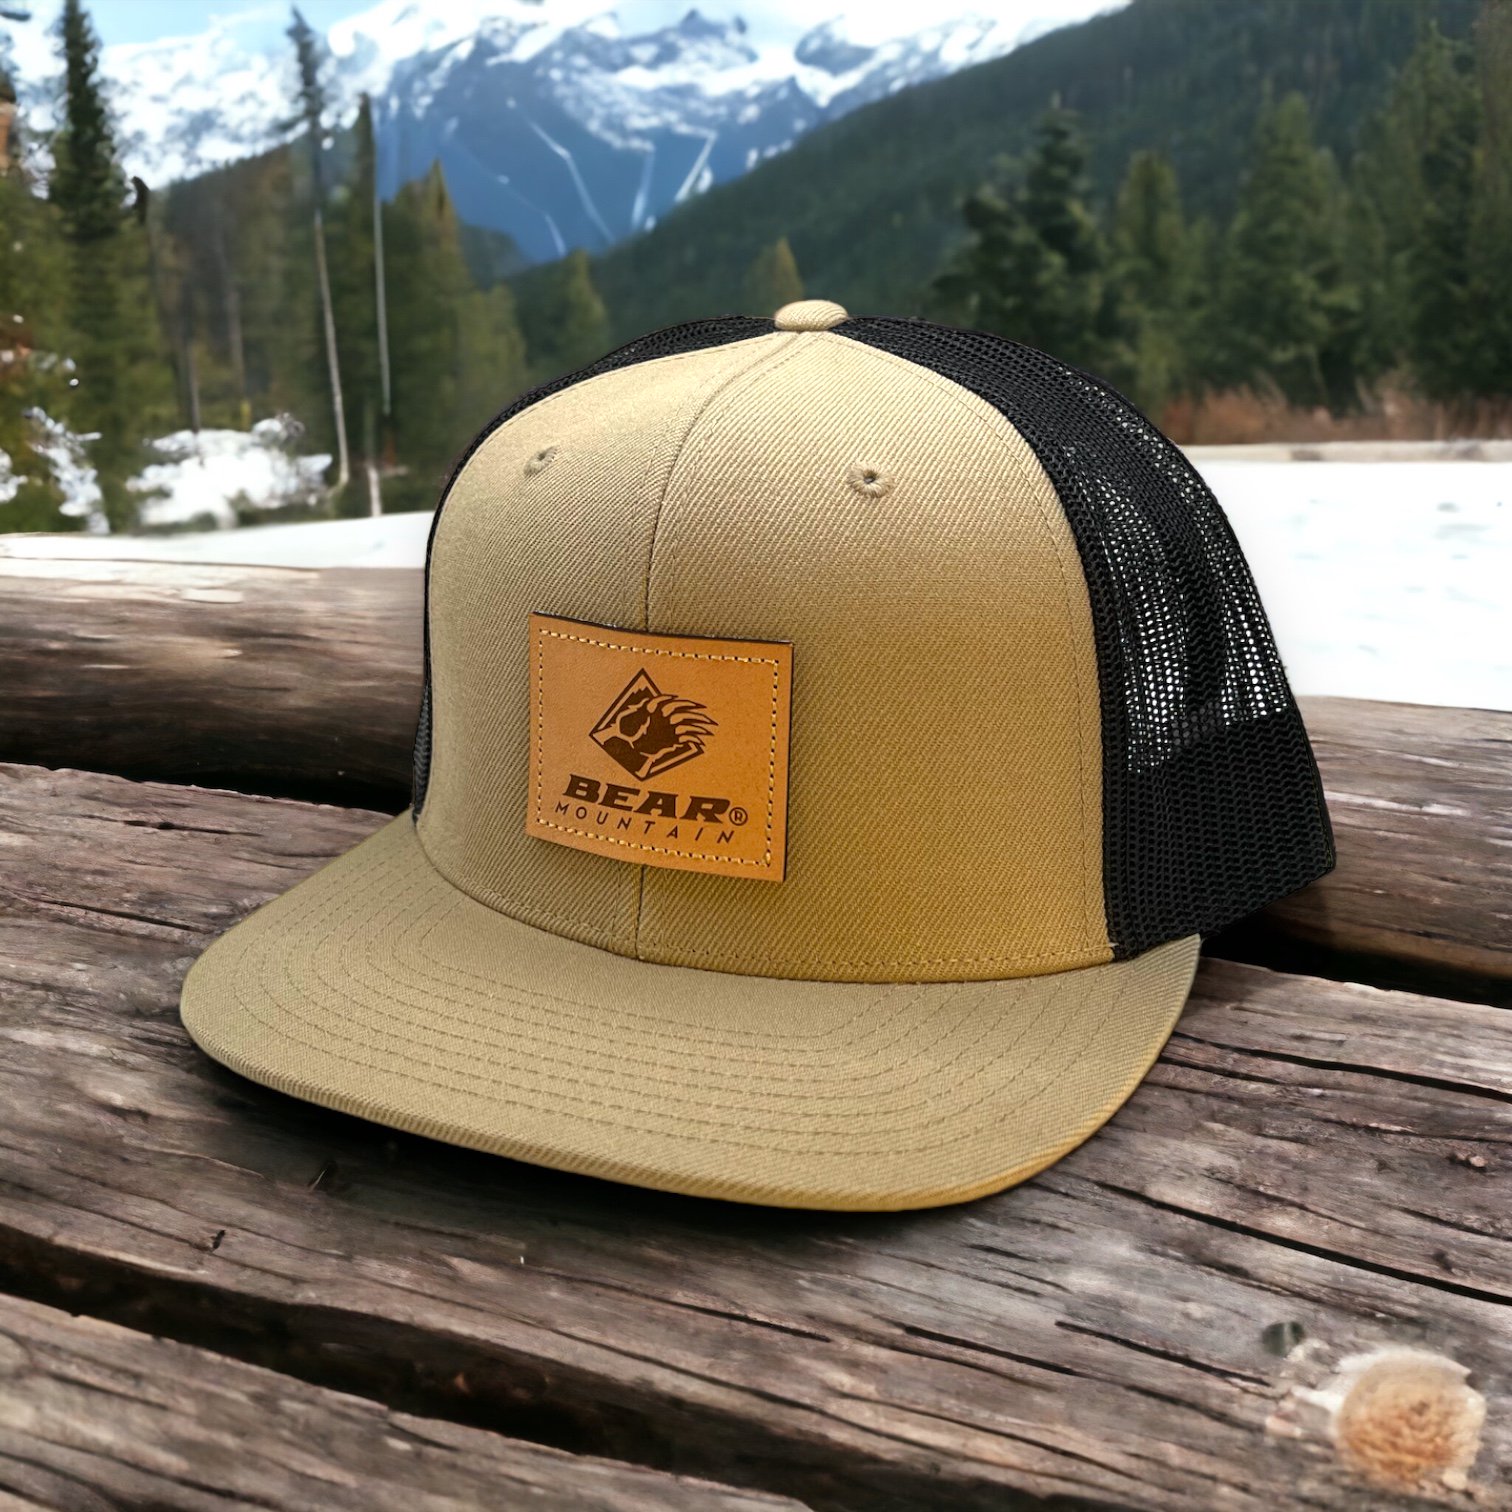 Bear Mountain khaki trucker hat with Bear claw square logo patch on front